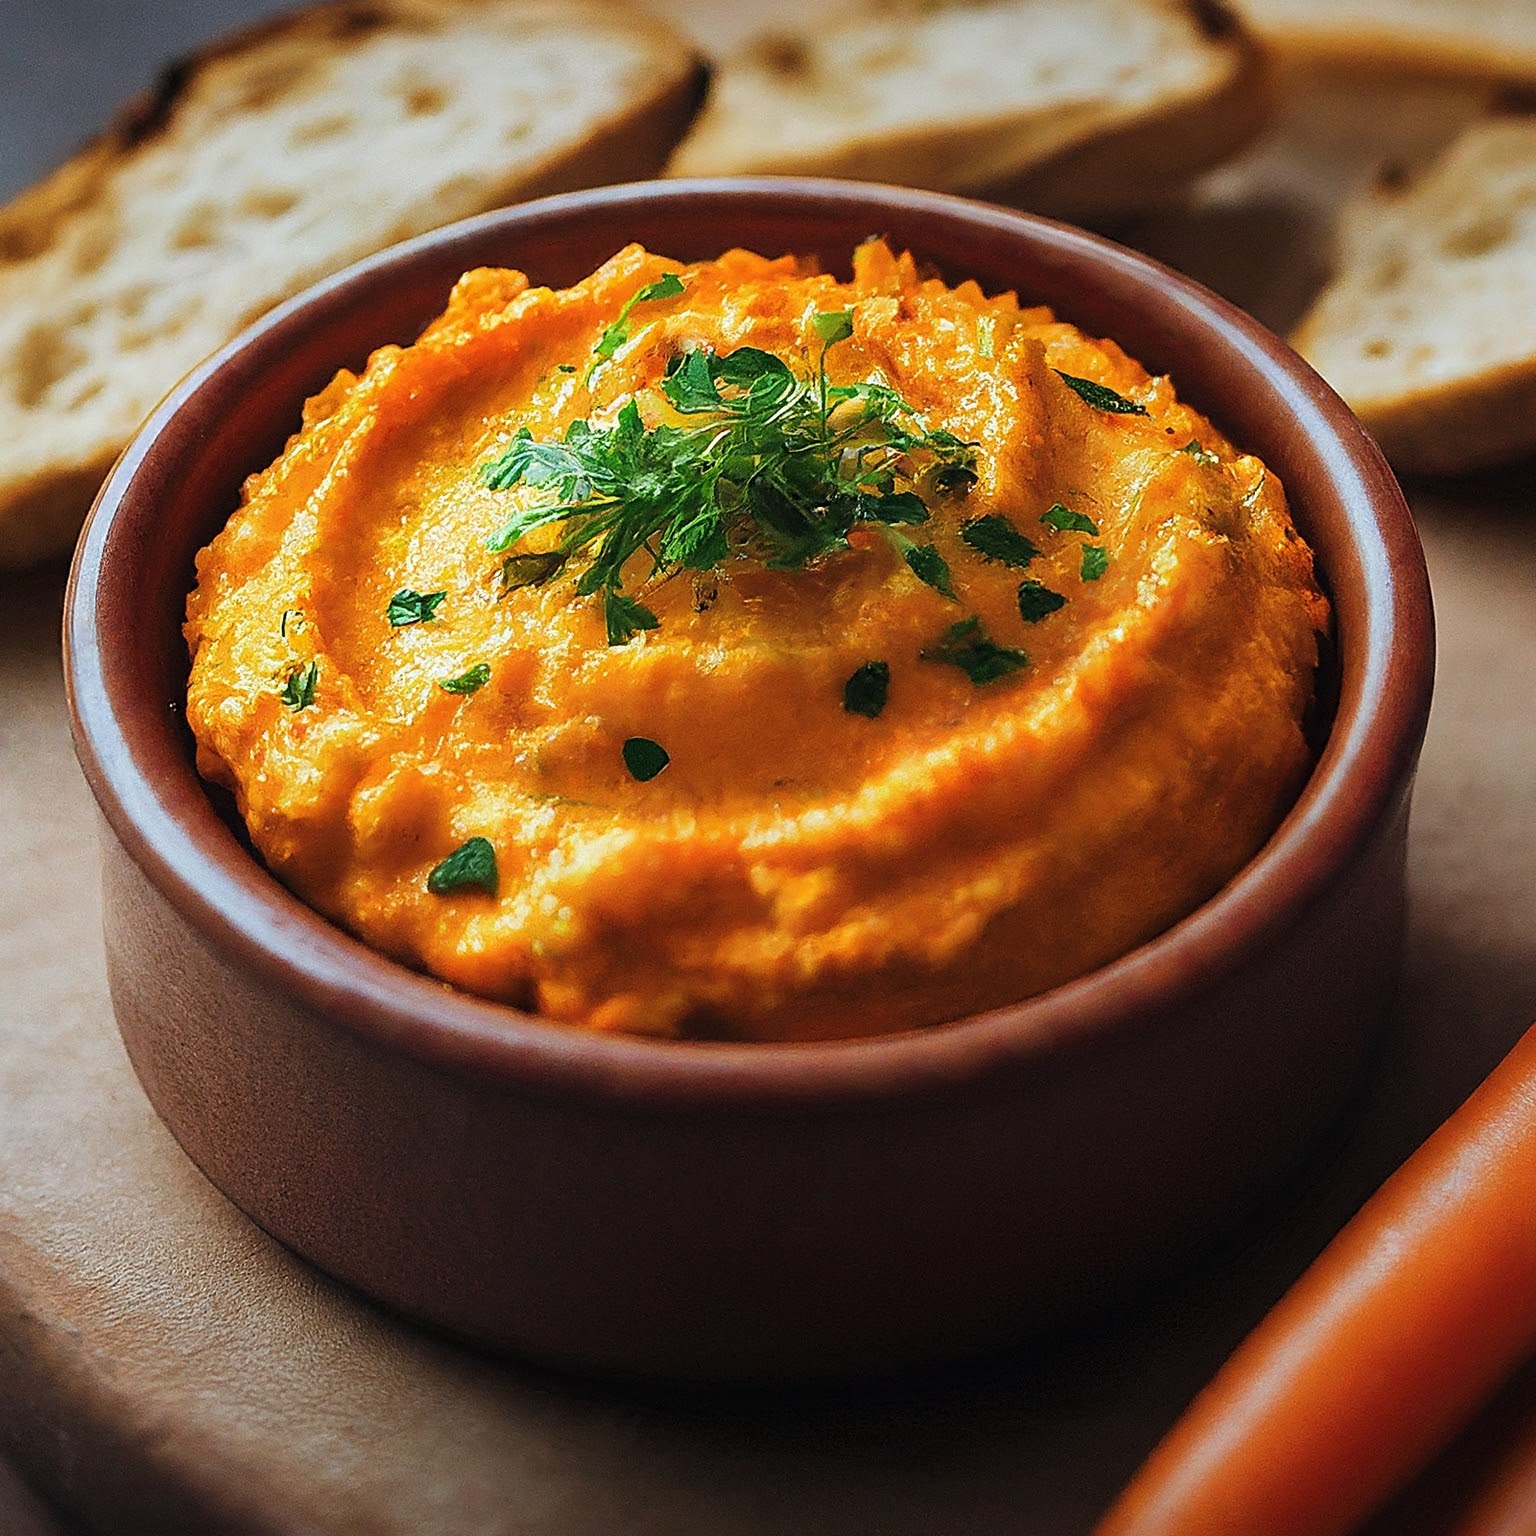 CARROT AND CHEESE SPREAD RECIPE: CREATIVE ADDITION!